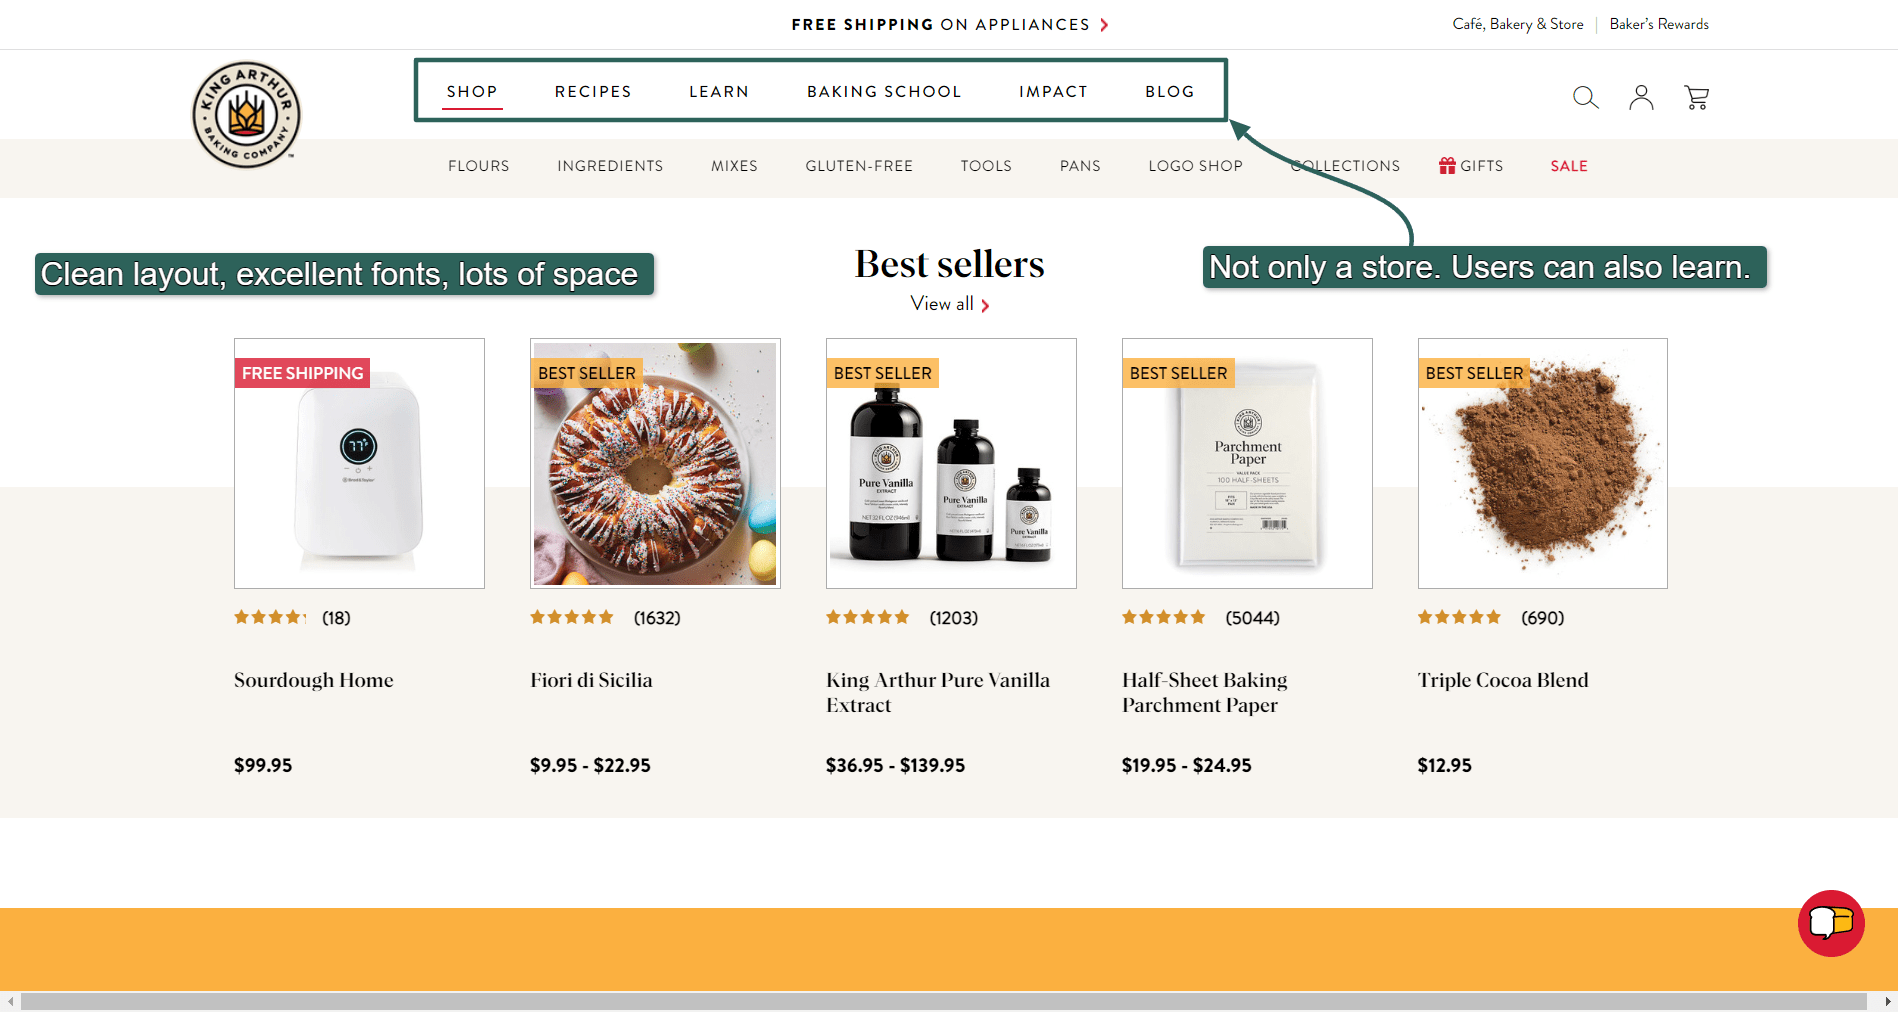 Users can find a lot of helpful content on King Arthur Baking Company’s website